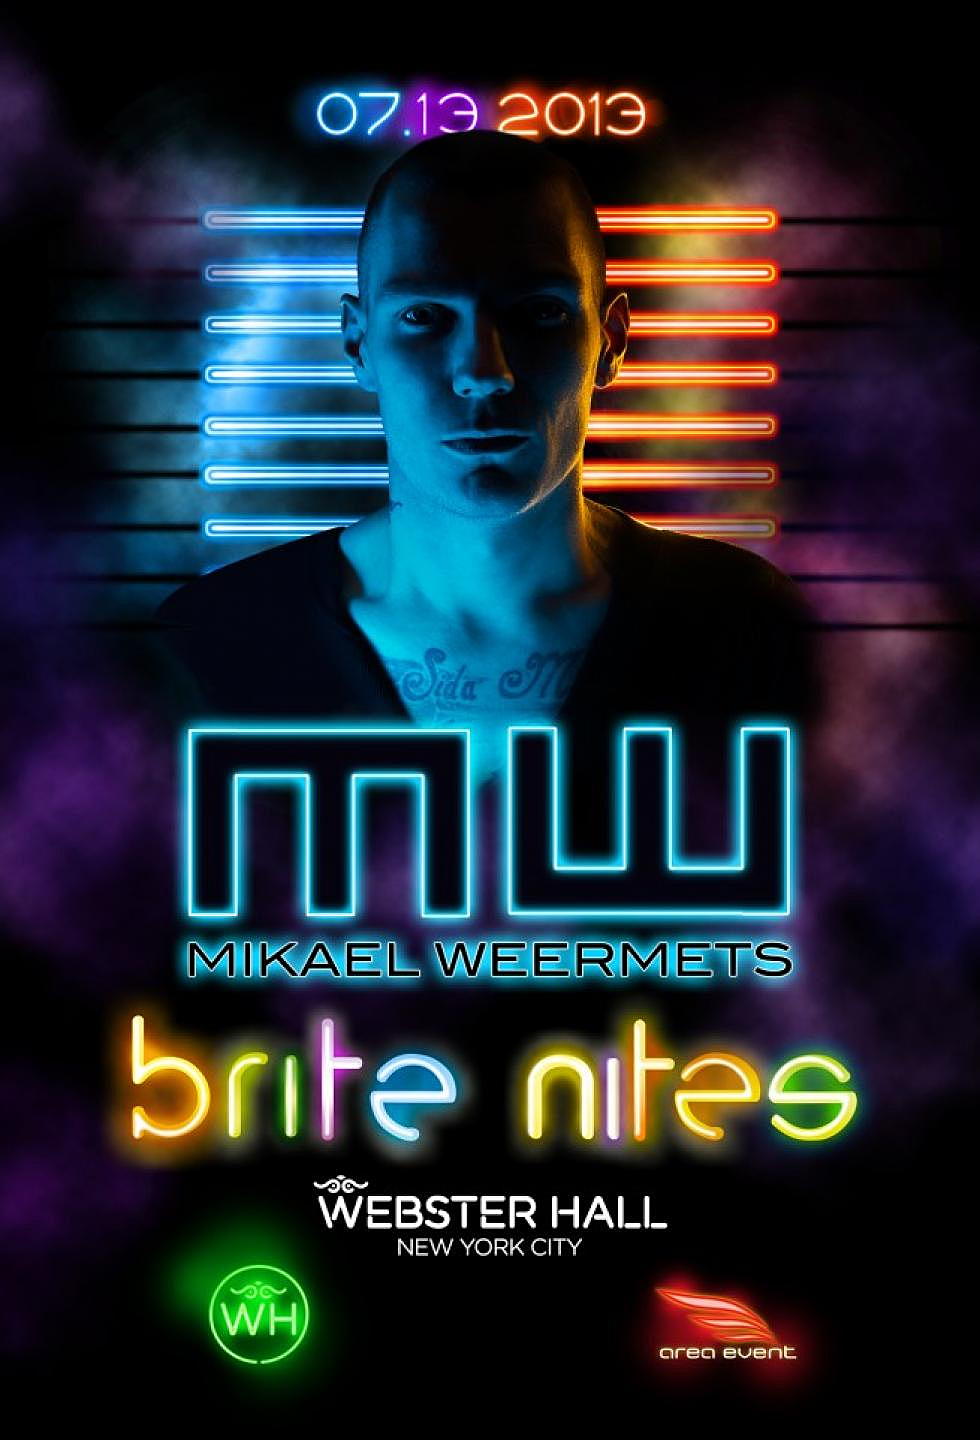 Win a Meet and Greet with Mikael Weermets at Webster Hall Saturday, July 13th